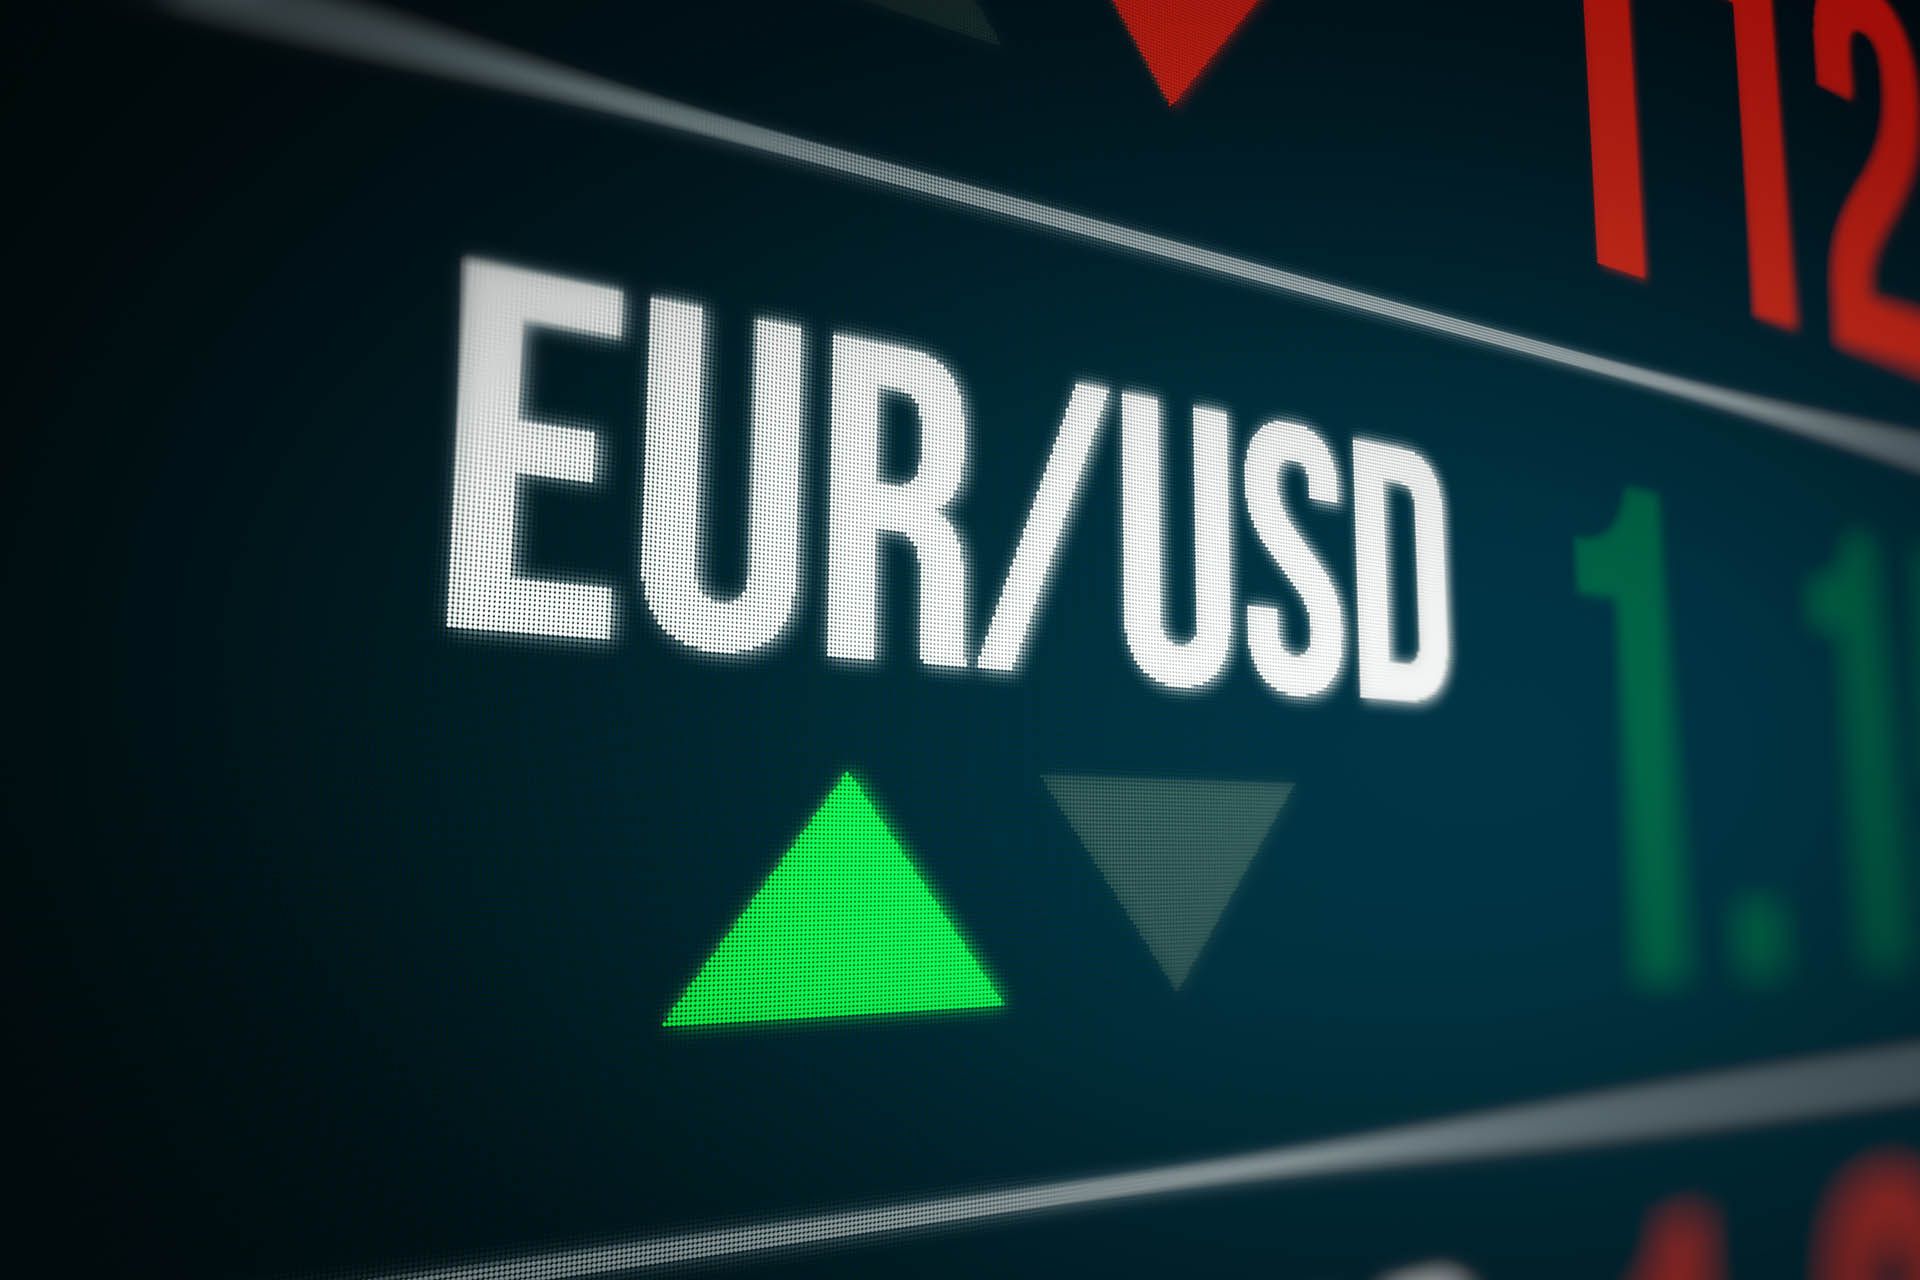 Eur to usd